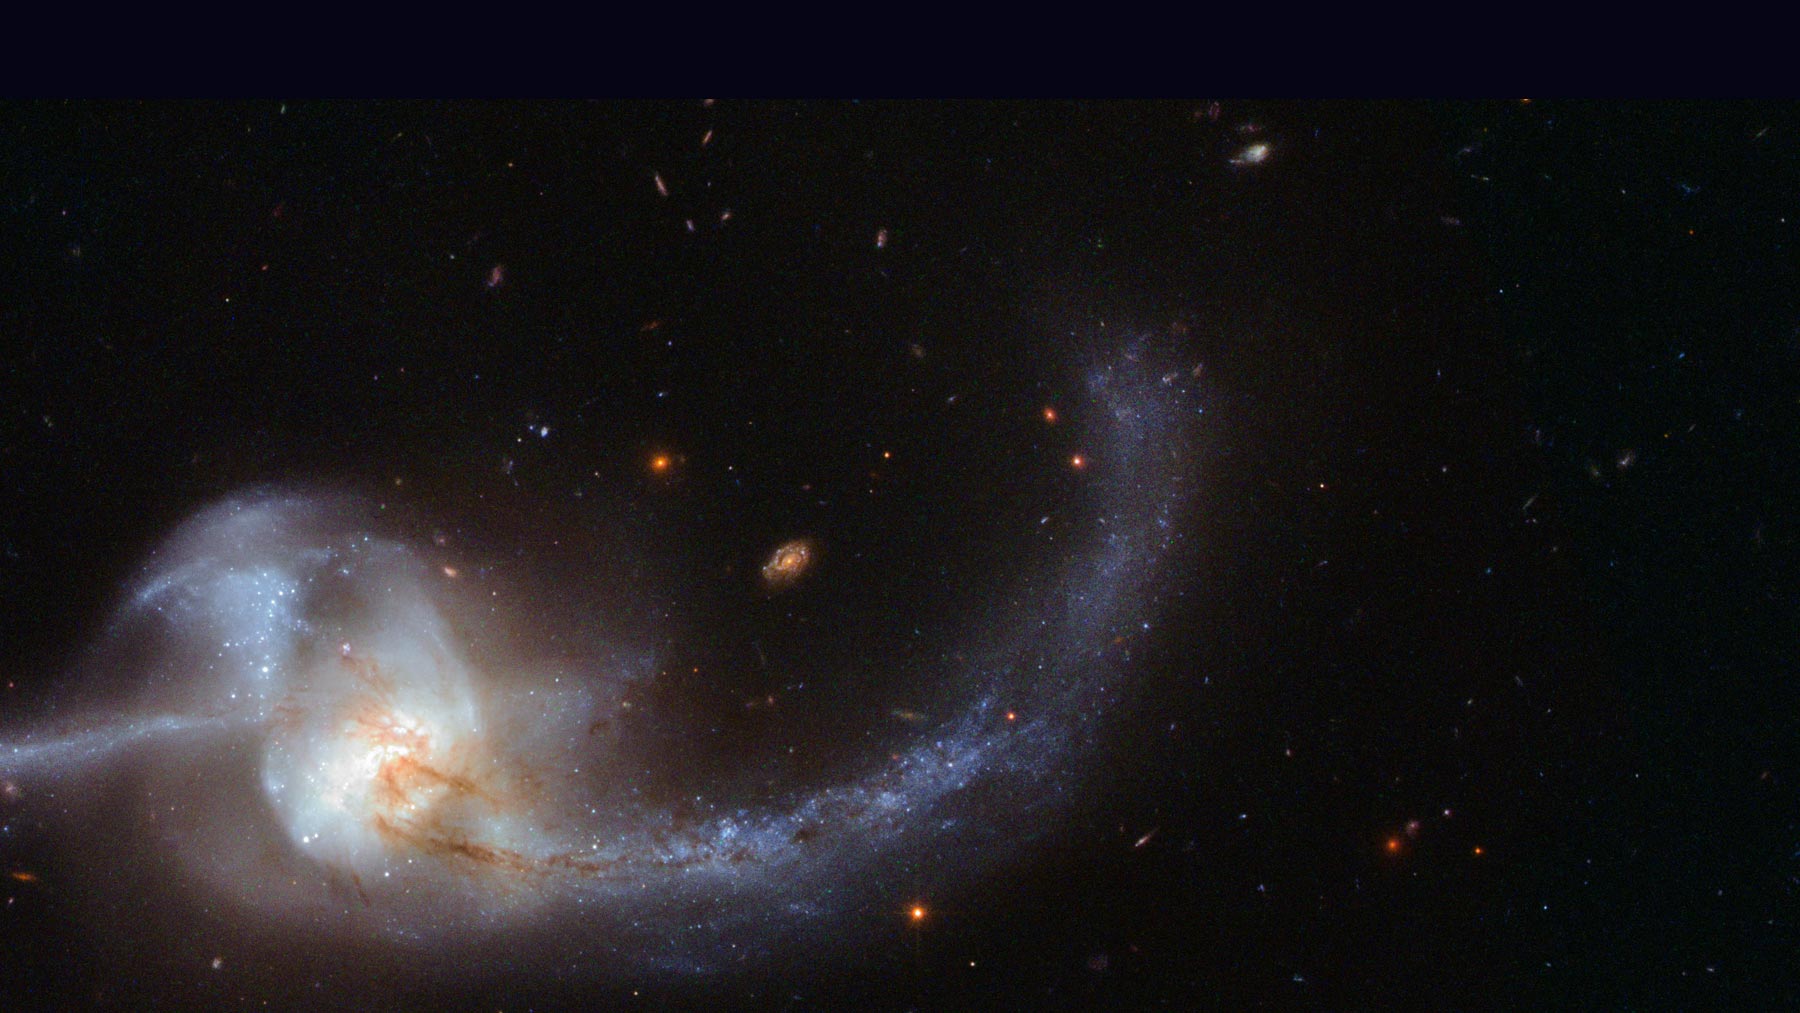 Background image of a spiraling galaxy